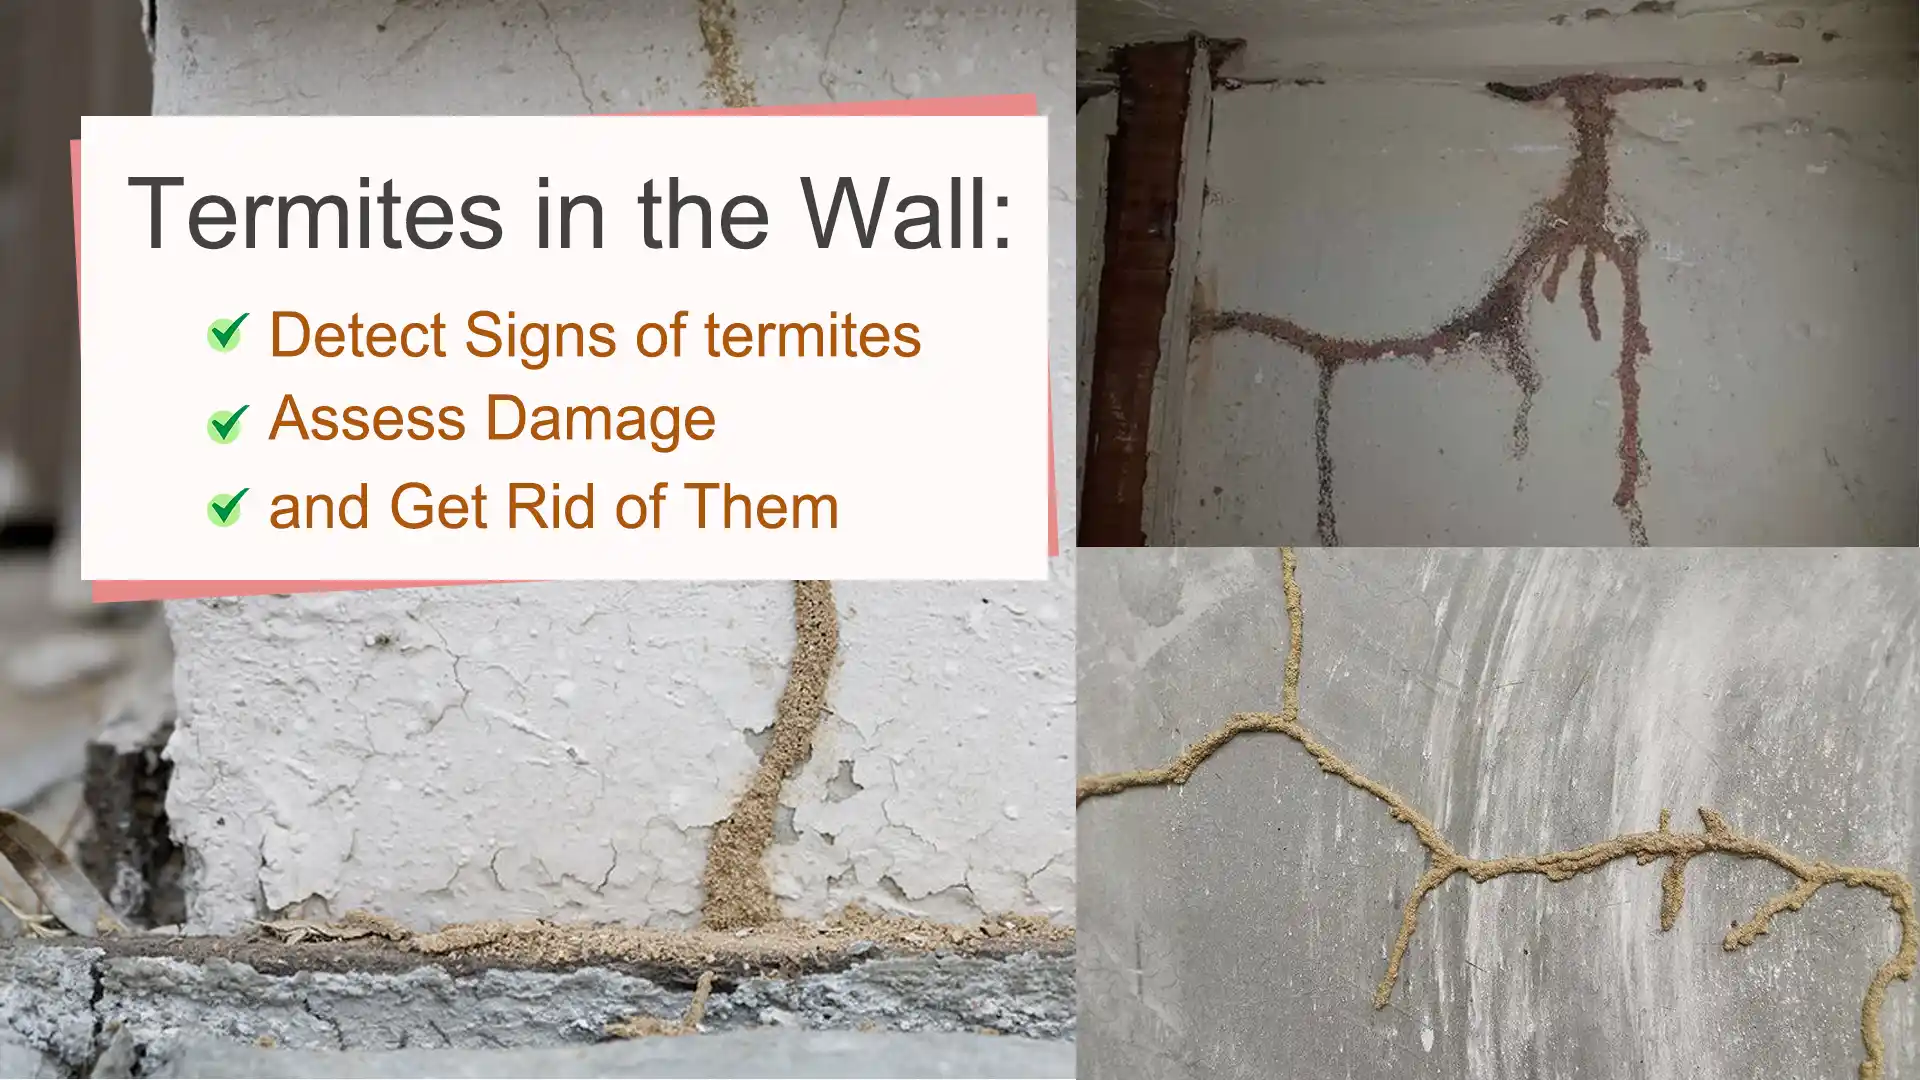 Termites in the Wall